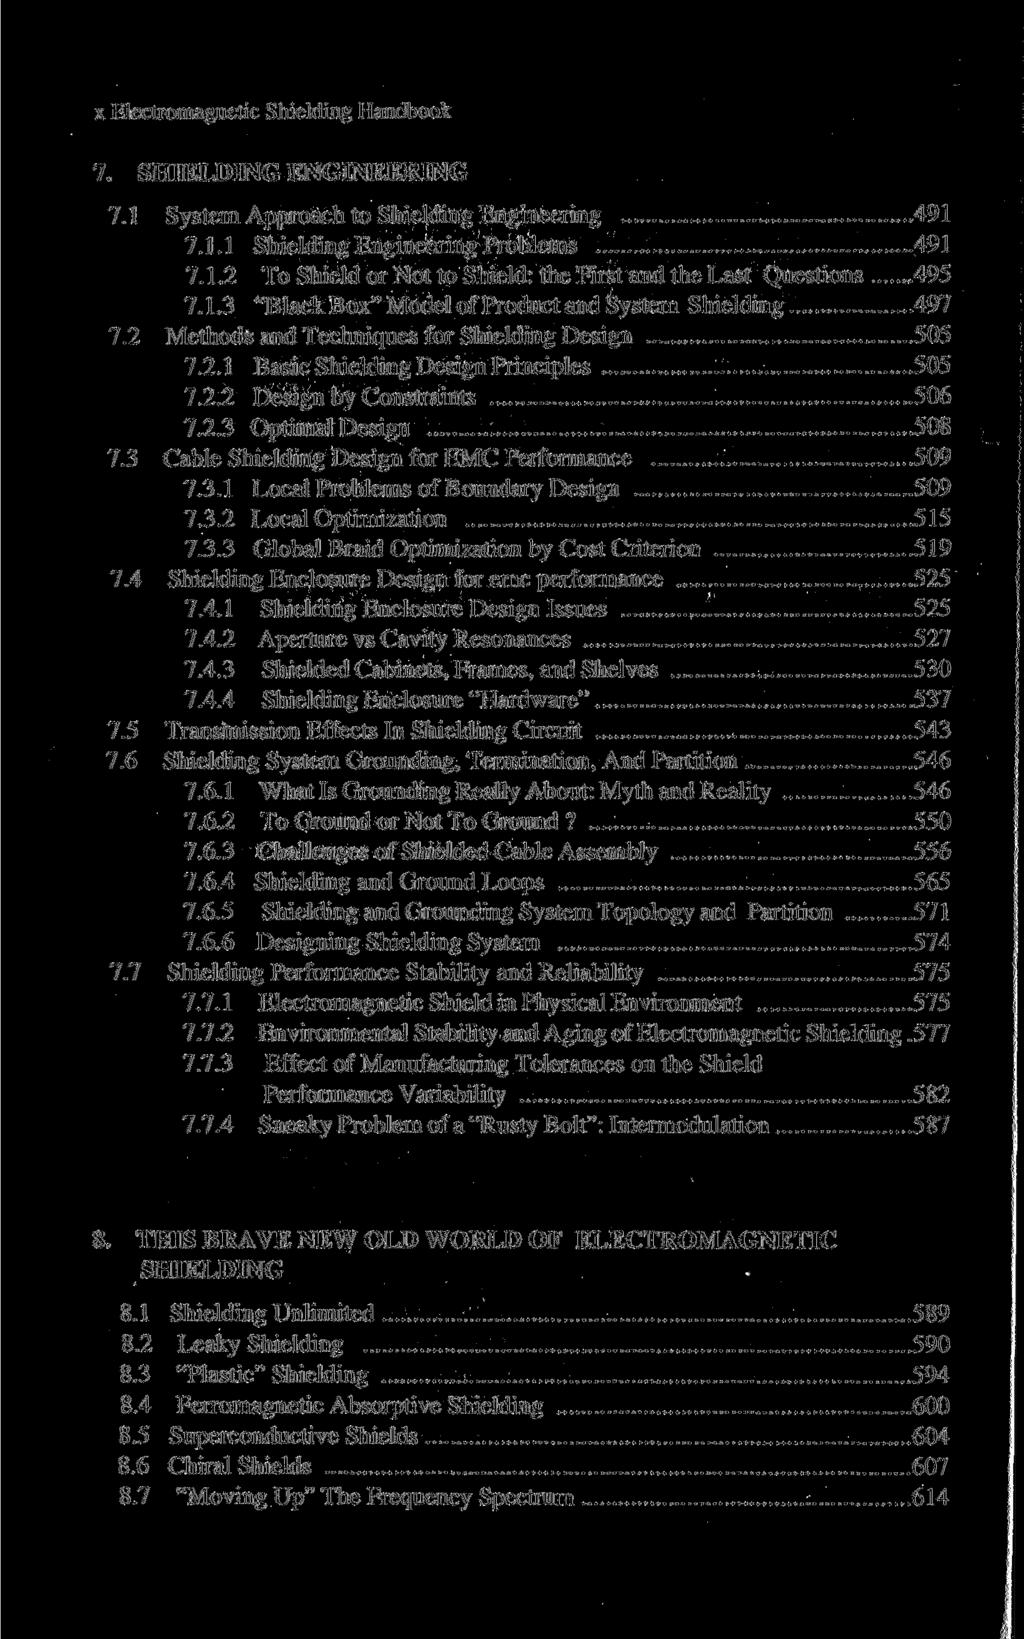 x Electromagnetic Shielding Handbook 7. SHIELDING ENGINEERING 7.1 System Approach to Shielding Engineering 491 7.1.1 Shielding Engineering Problems 491 7.1.2 To Shield or Not to Shield: the First and the Last Questions 495 7.